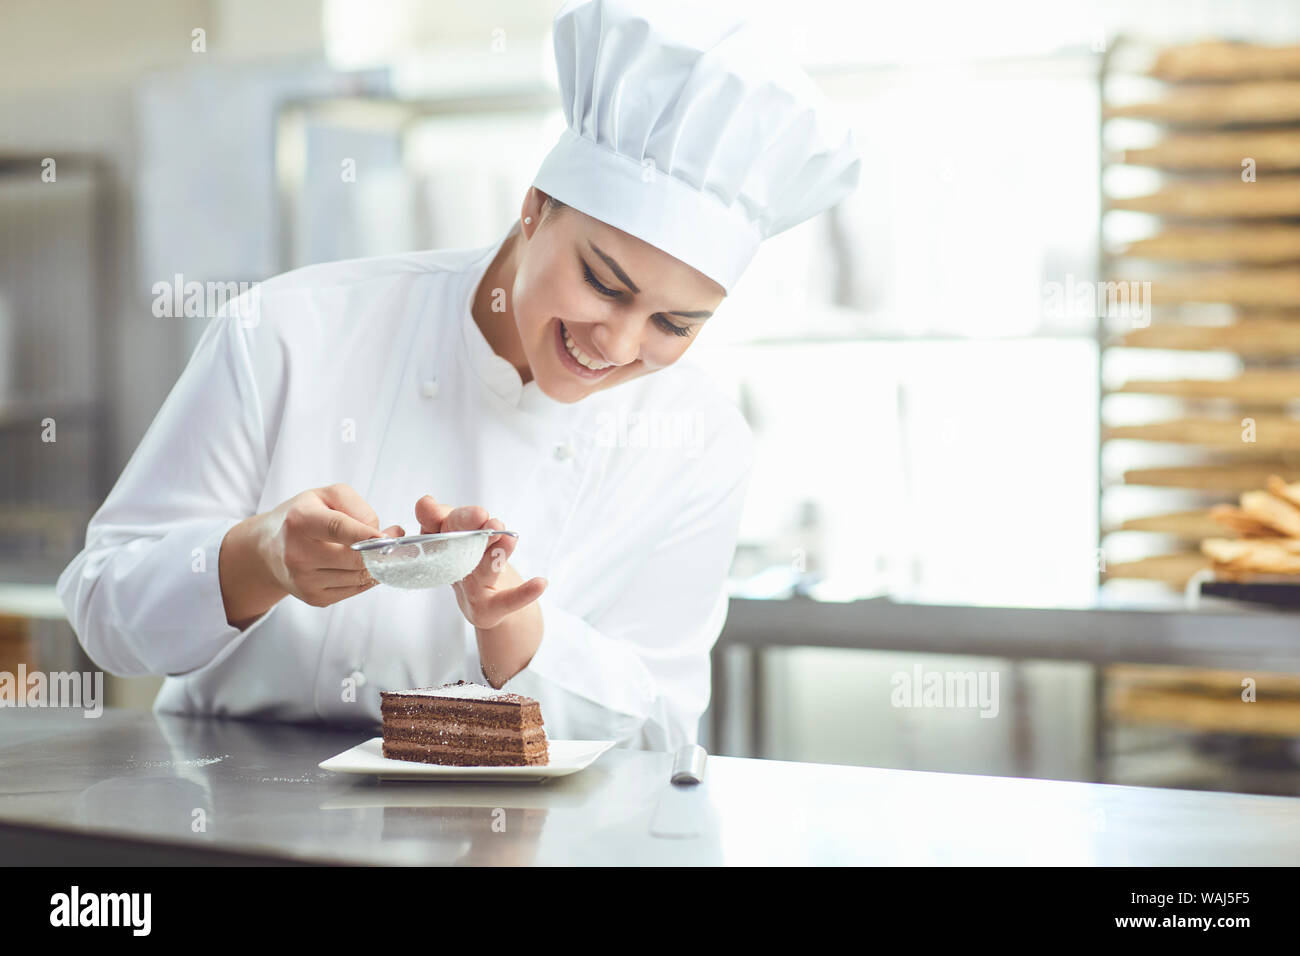 Confectioner decorating chocolate cake in pastry shop. Stock Photo